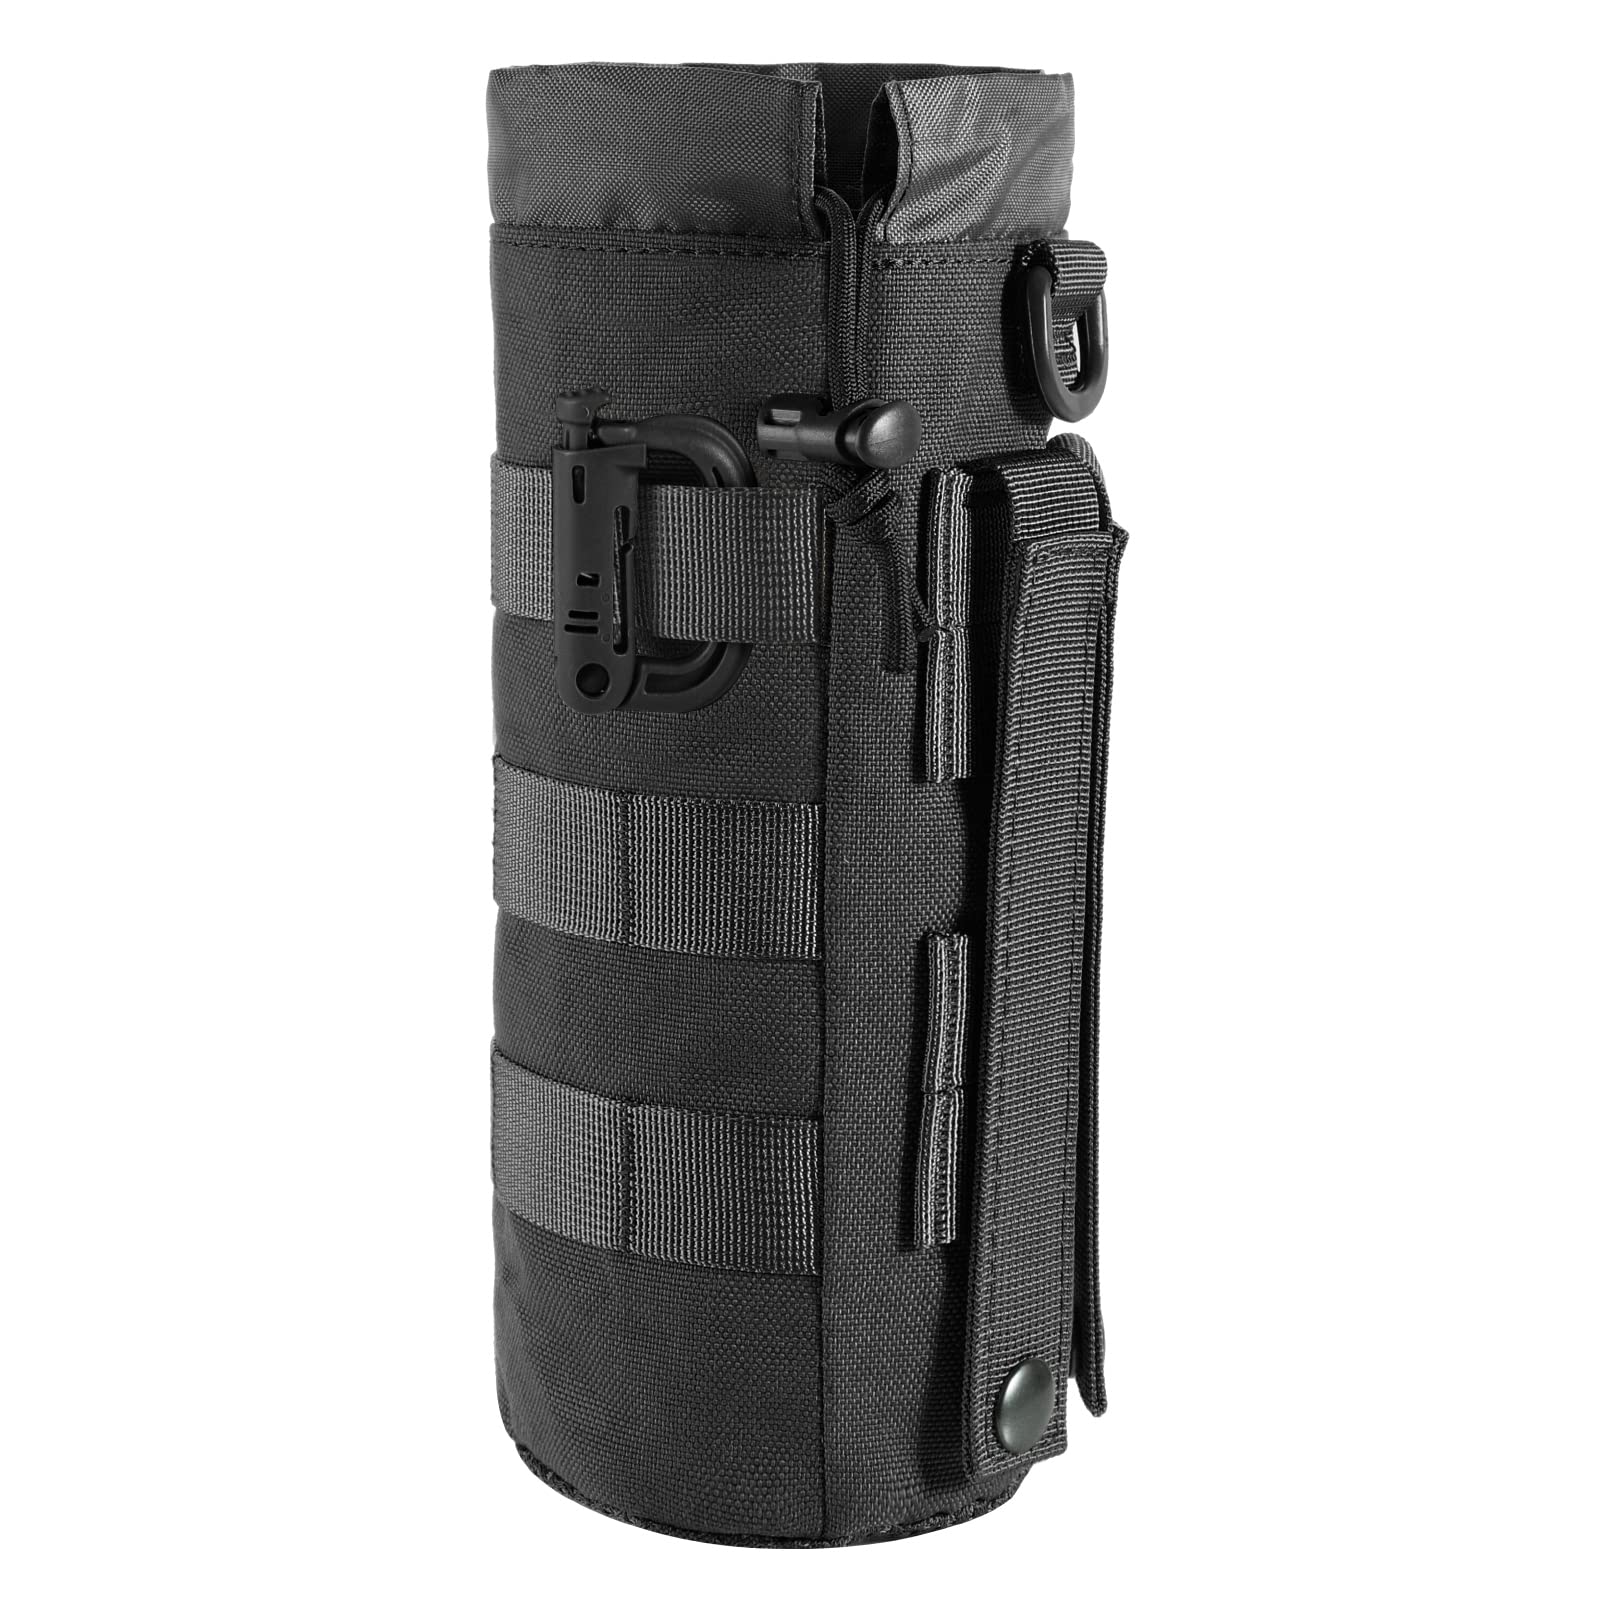 Tactical MOLLE Water Bottle Carrier Pouch Holder Military Army